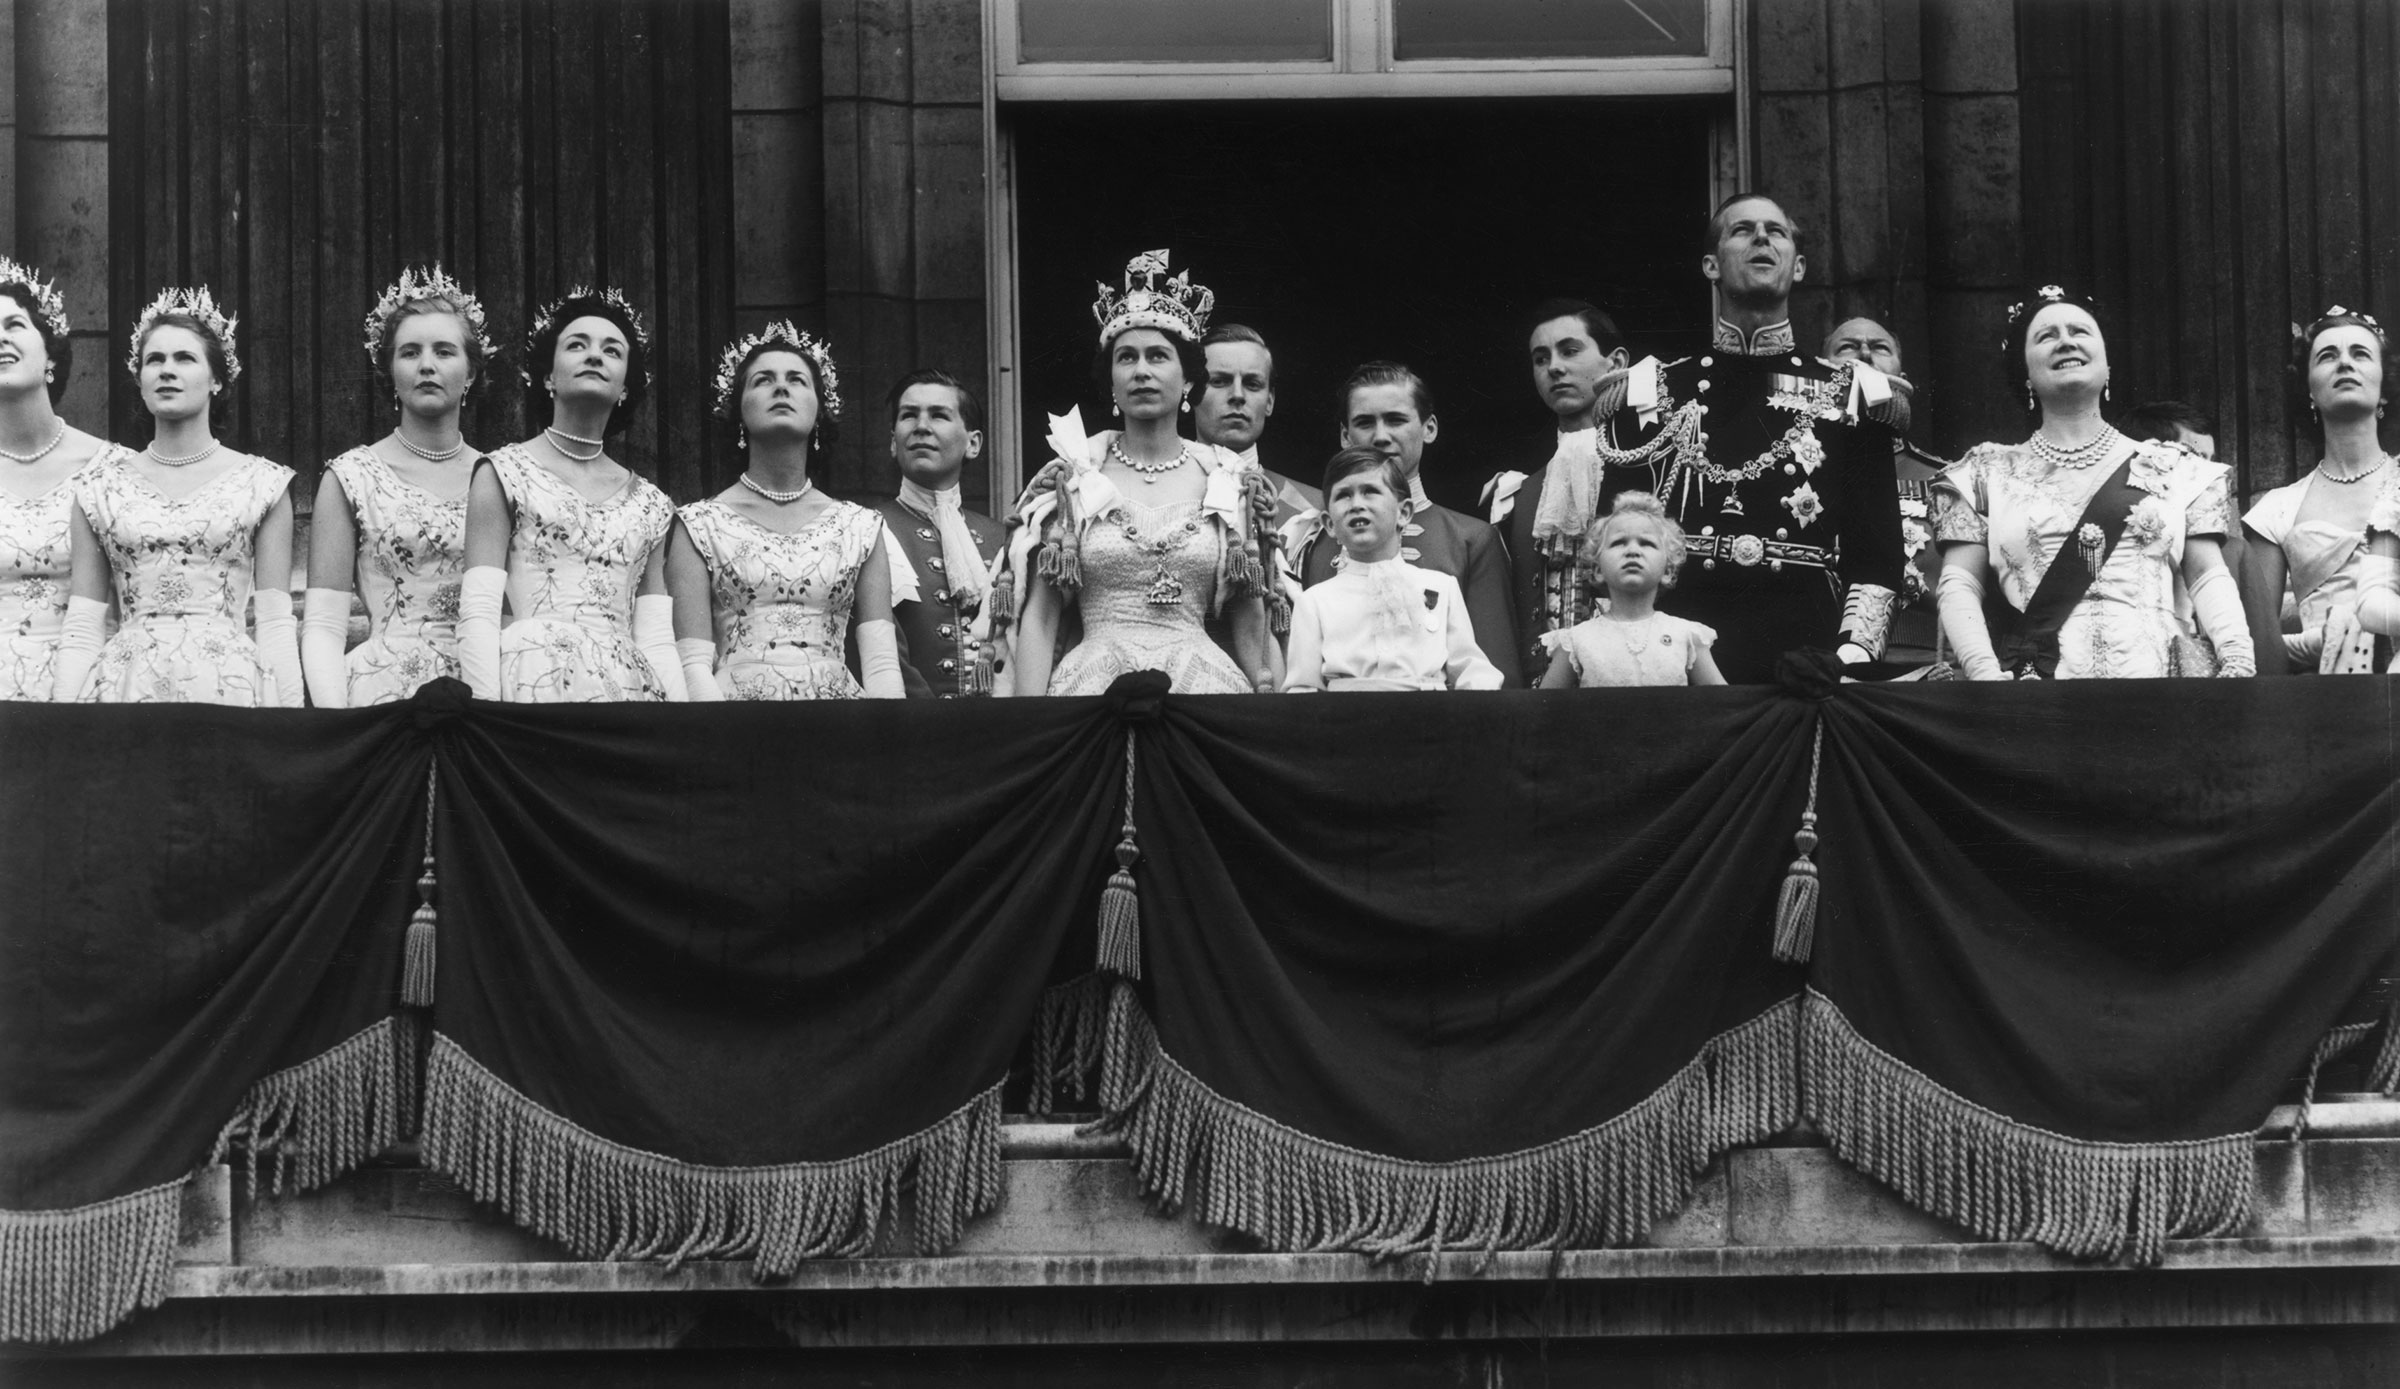 Queen Elizabeth II and her family and attendants face the crowds from the balcony of Buckingham Palace on the day of her coronation, June 2, 1953. (Fox Photos/Getty Images)